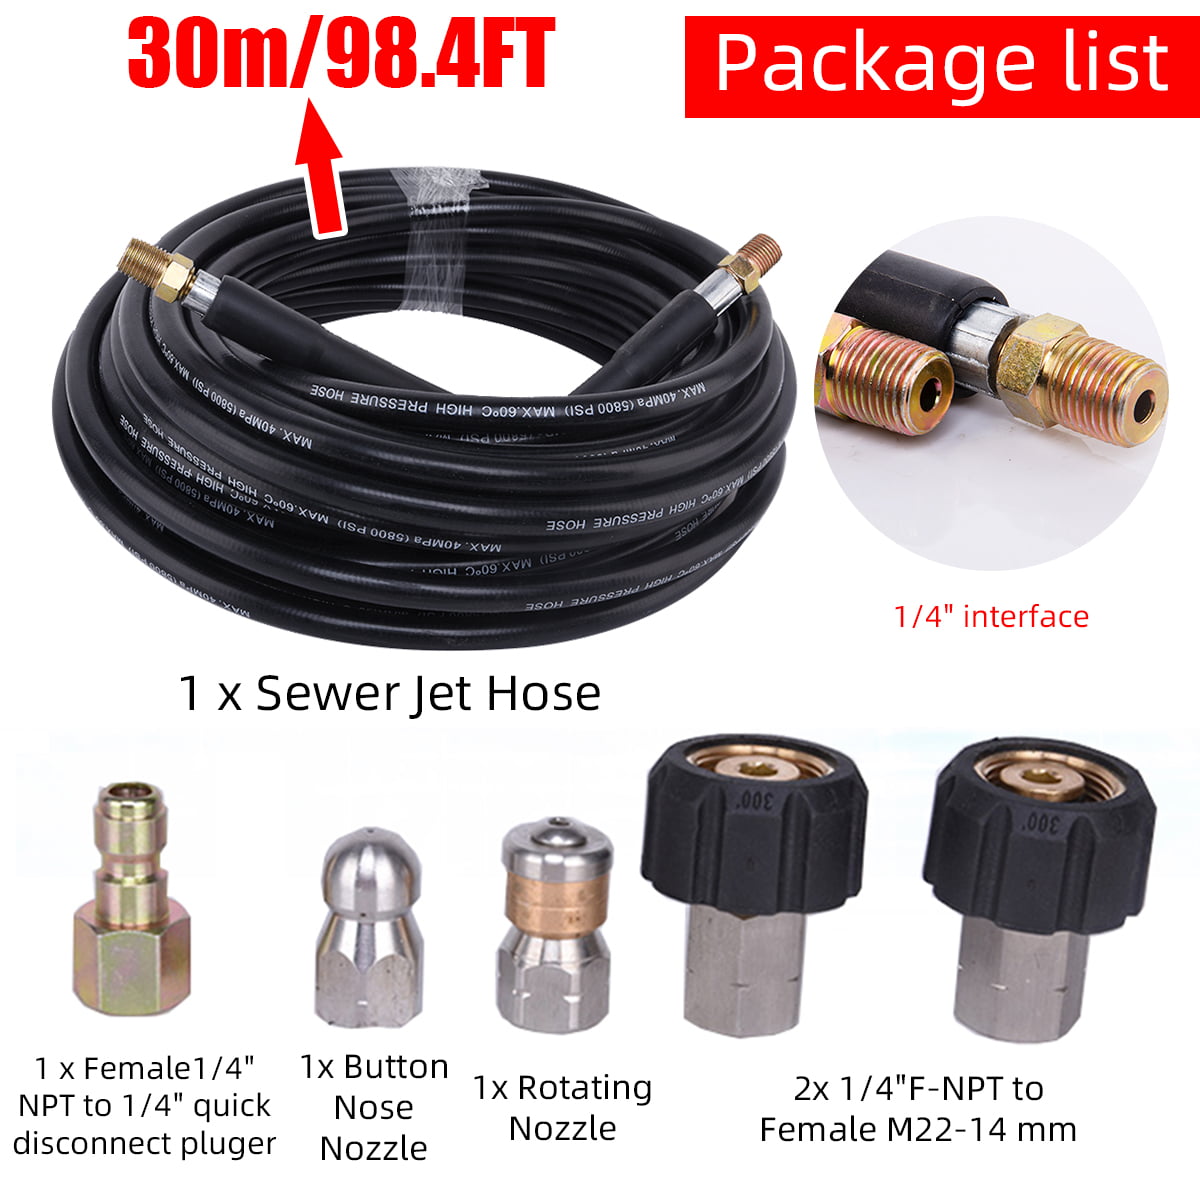 Newest 5800PSI Drain Cleaner Hose 1/4 Inch NPT Corner Rotating and Button Nose Sewer Jetting Nozzle Pearl Corsage Pin Waterproof Tape ZOFINE Sewer Jetter Kit for Pressure Washer 50FT 